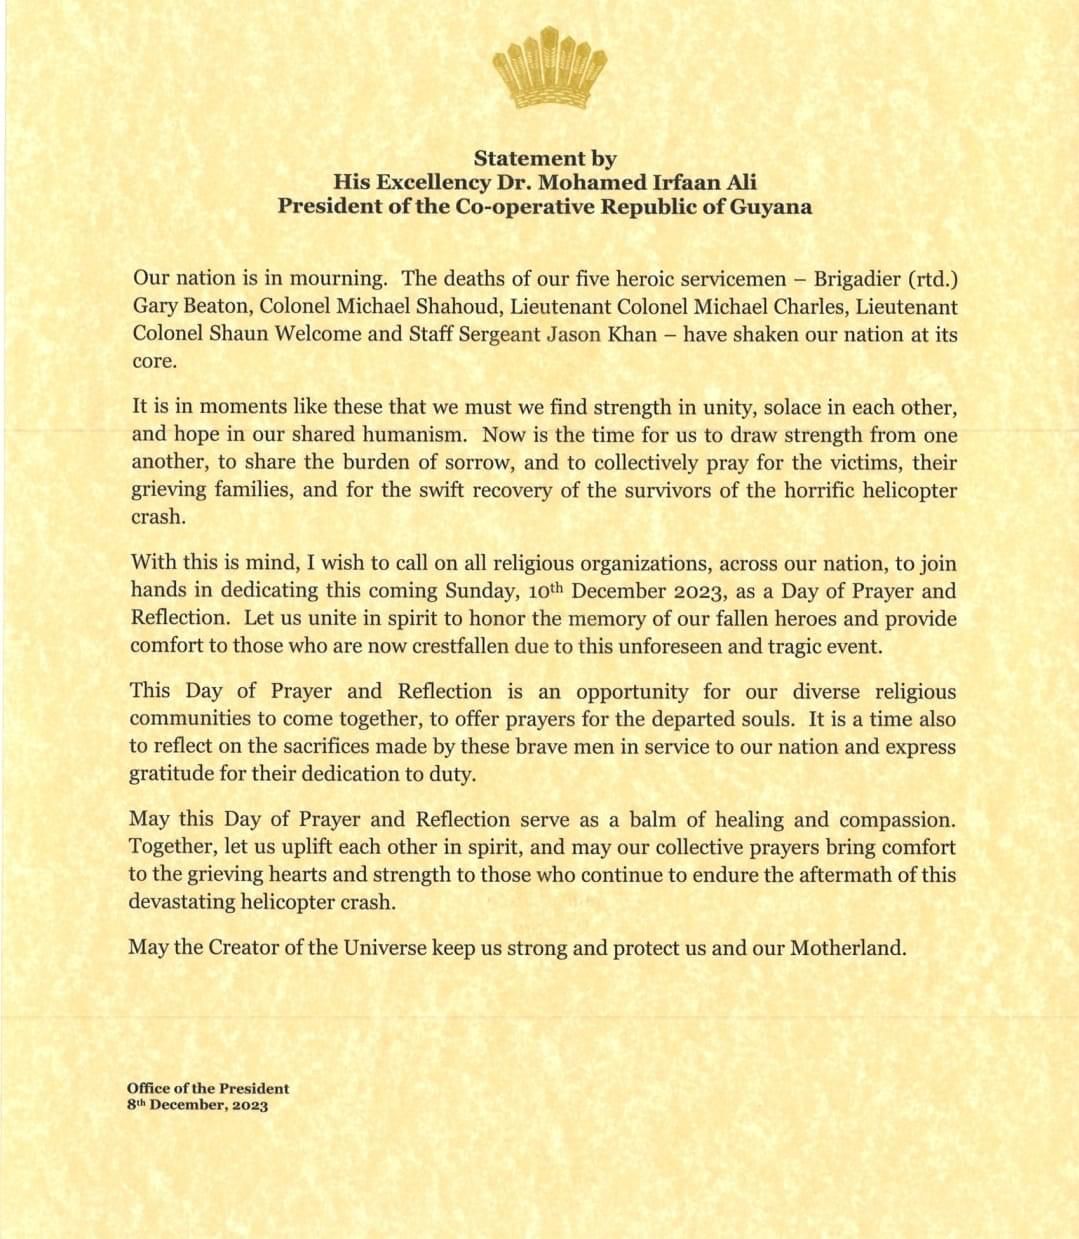 Statement by His Excellency Dr Mohamed Irfaan Ali, President of the Cooperative Republic of Guyana